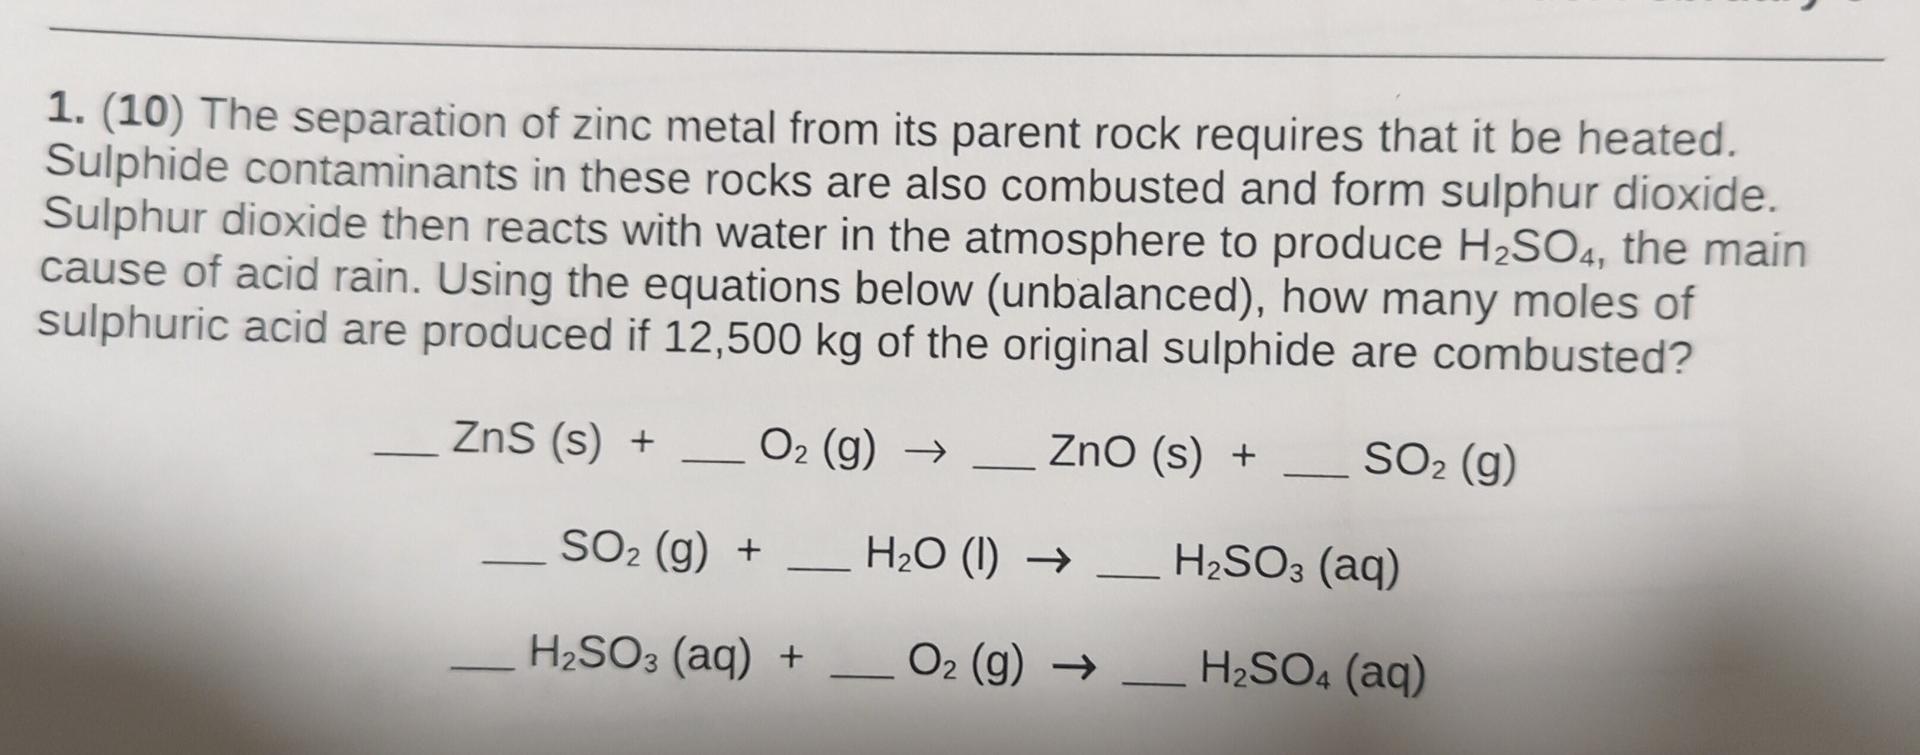 1. (10) The separation of zinc metal from its parent rock requires that it be heated. Sulphide contaminants in these rocks ar